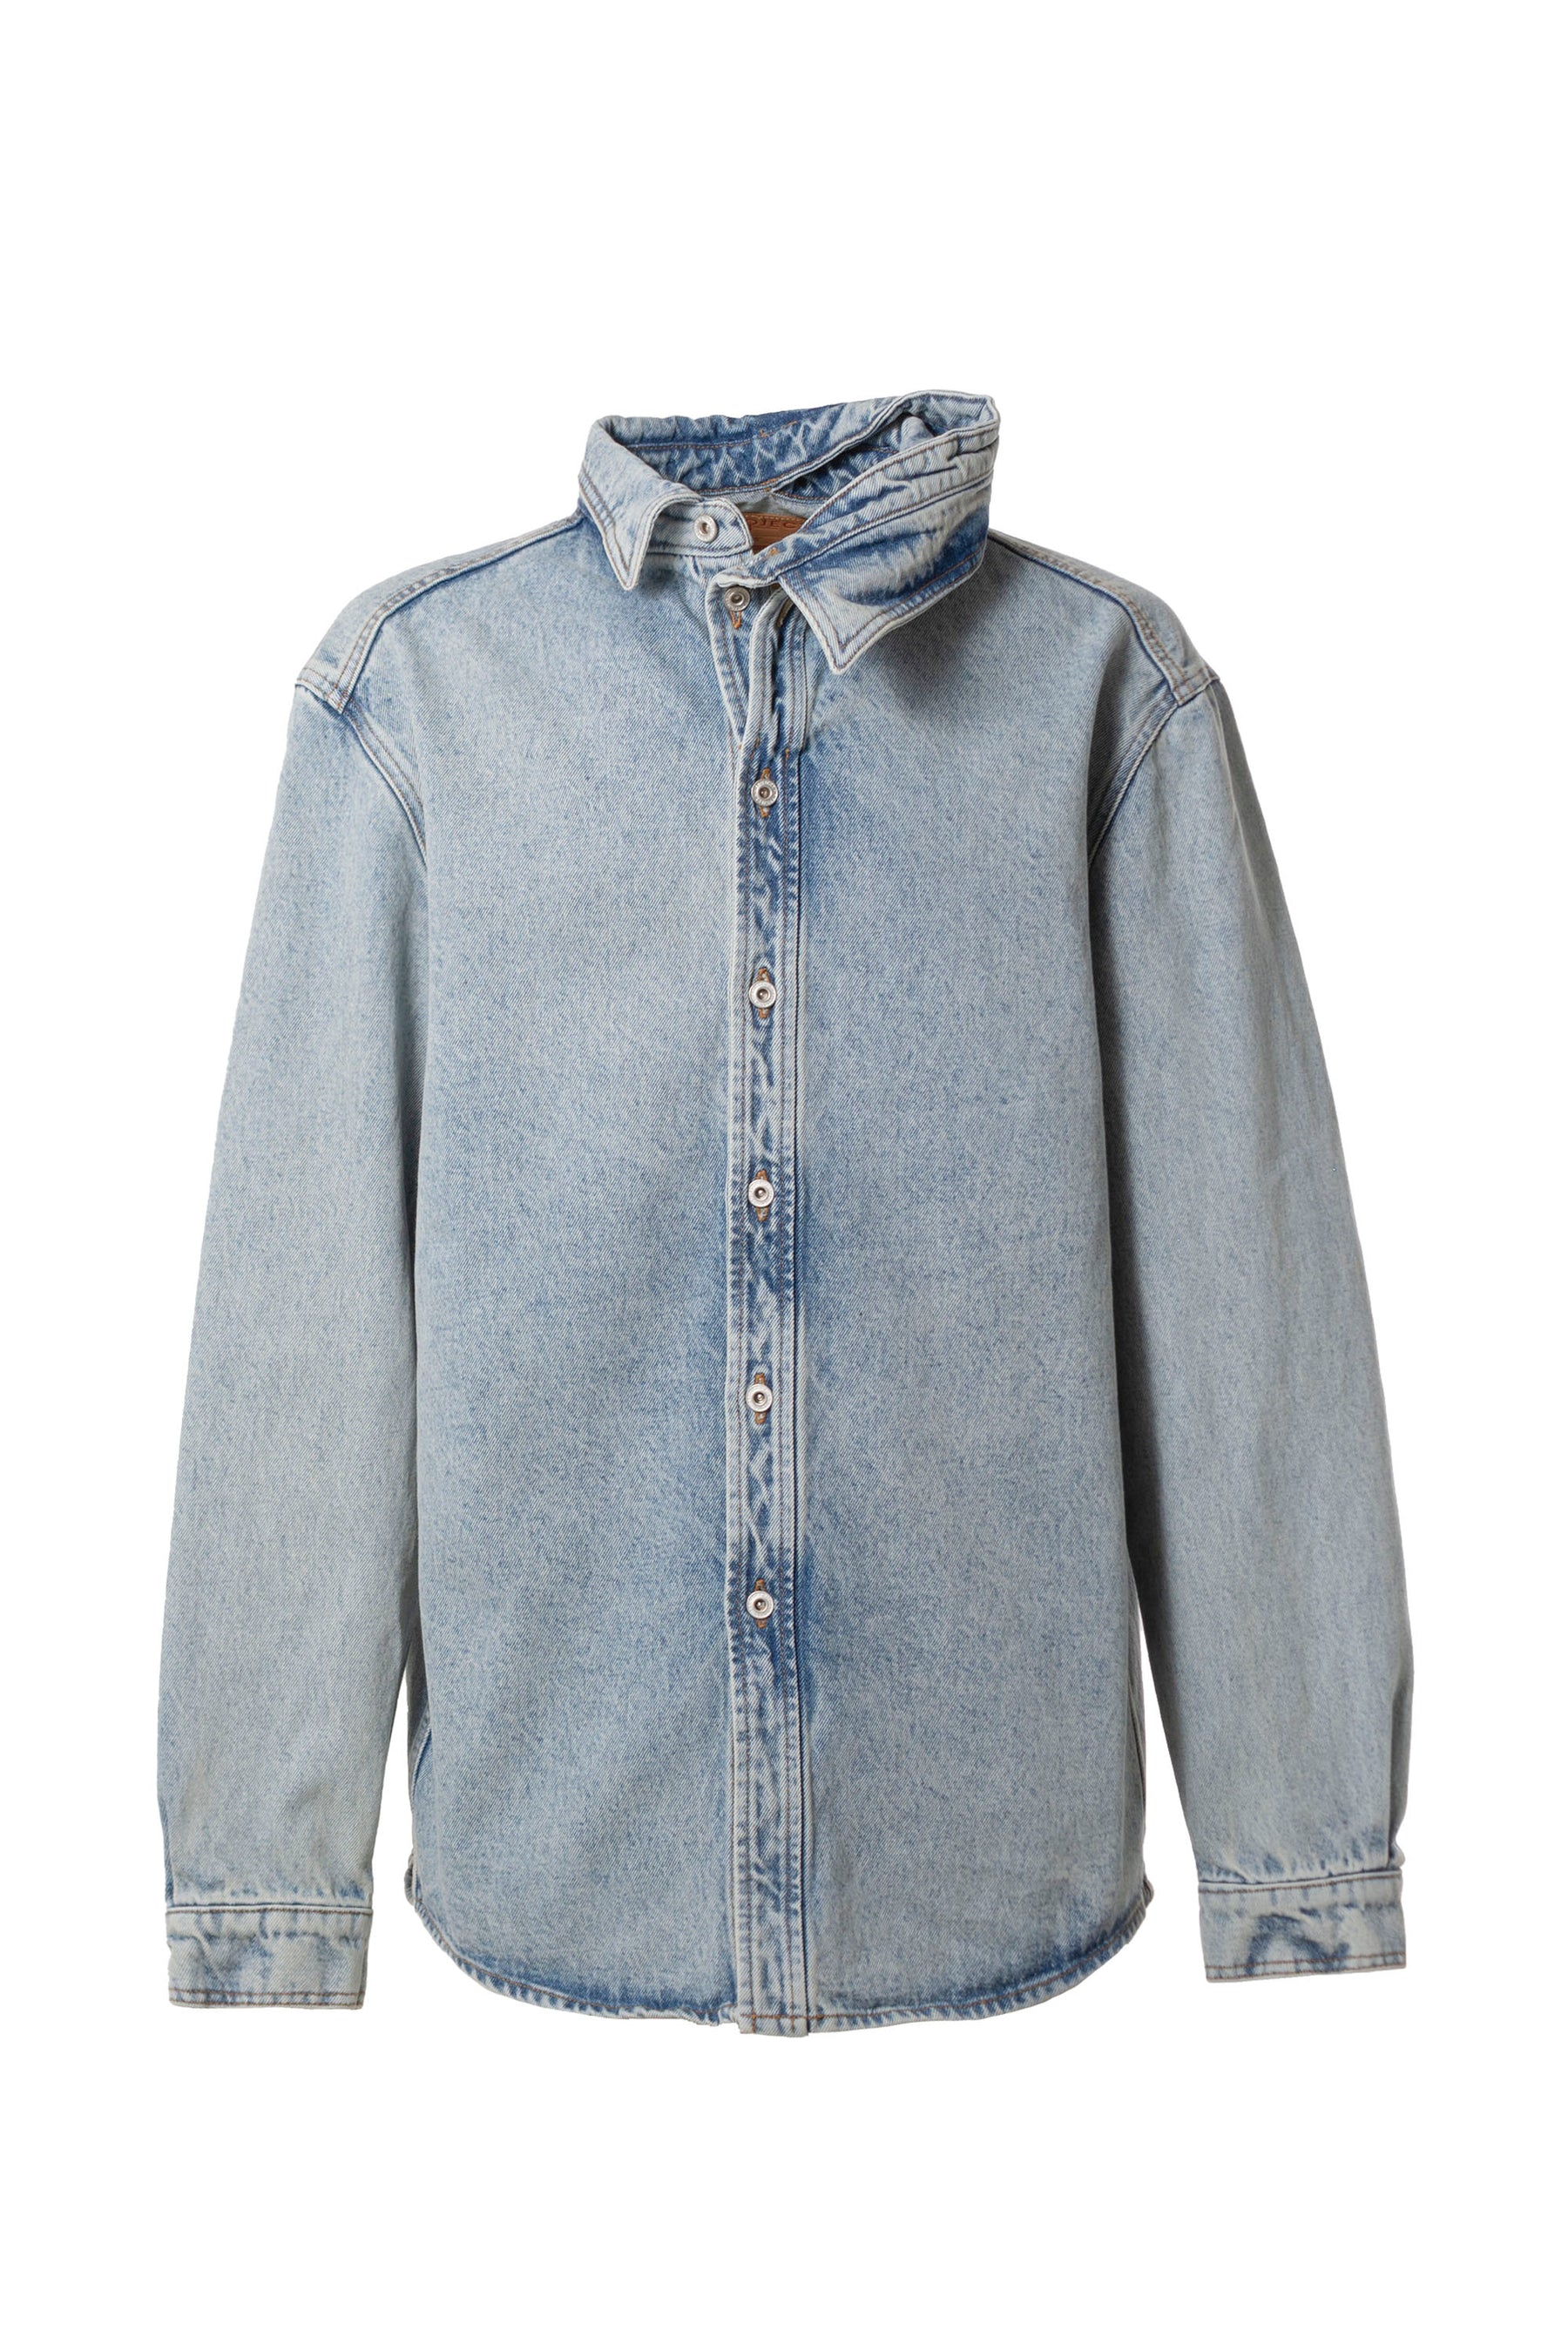 Y/PROJECT ワイプロジェクト SS23 DOUBLE COLLAR DENIM OVERSHIRT / L